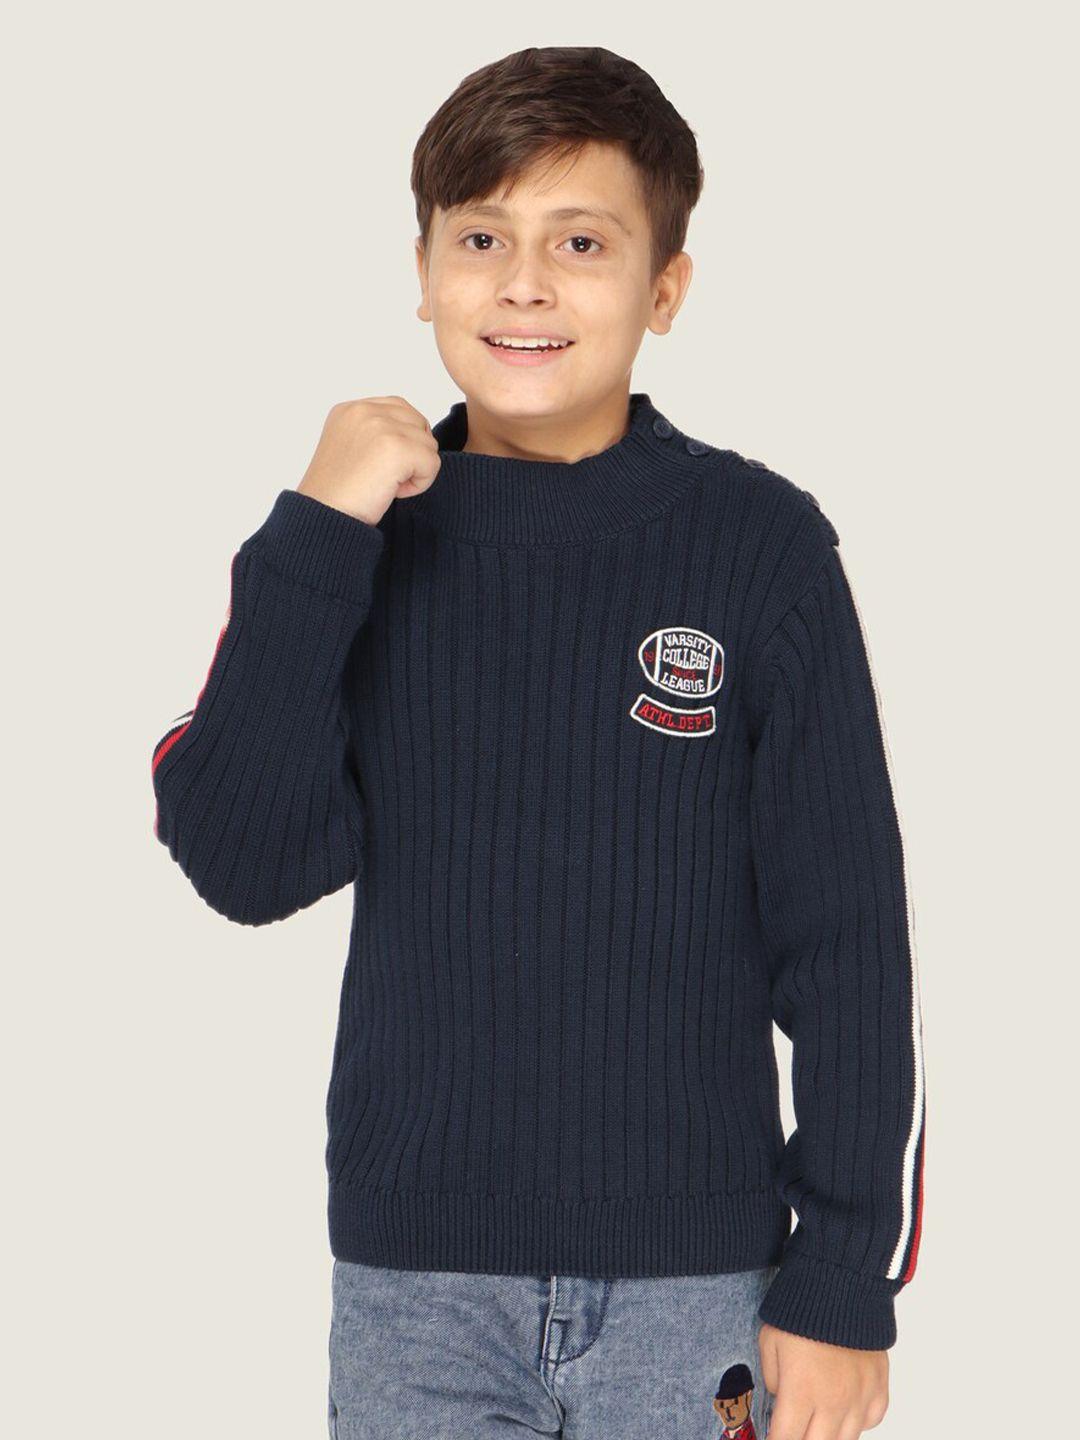 lasnak boys navy blue & white ribbed cotton pullover sweater